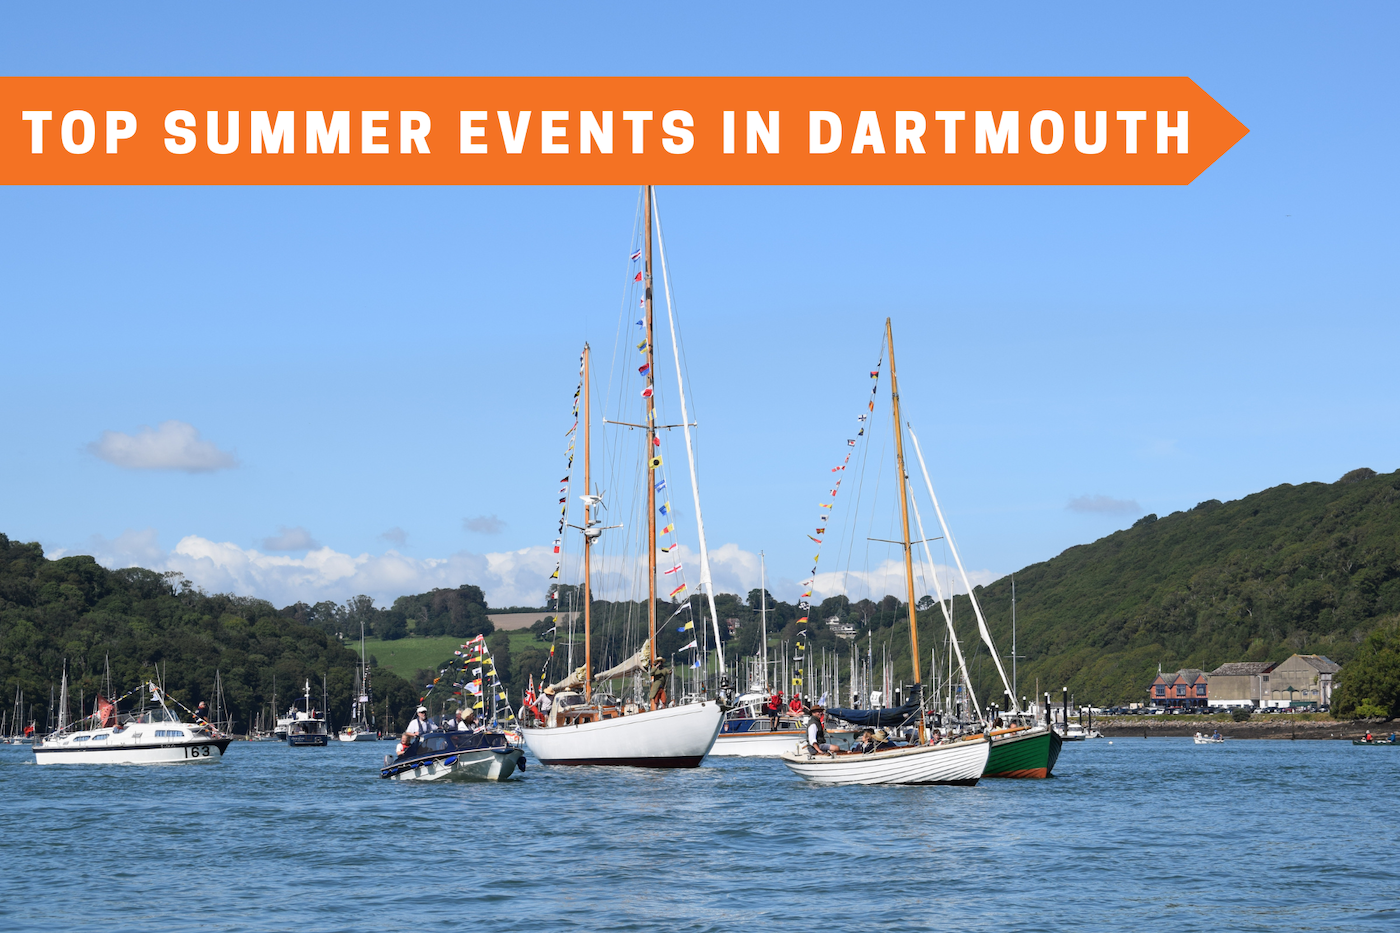 Top Summer Events in Dartmouth